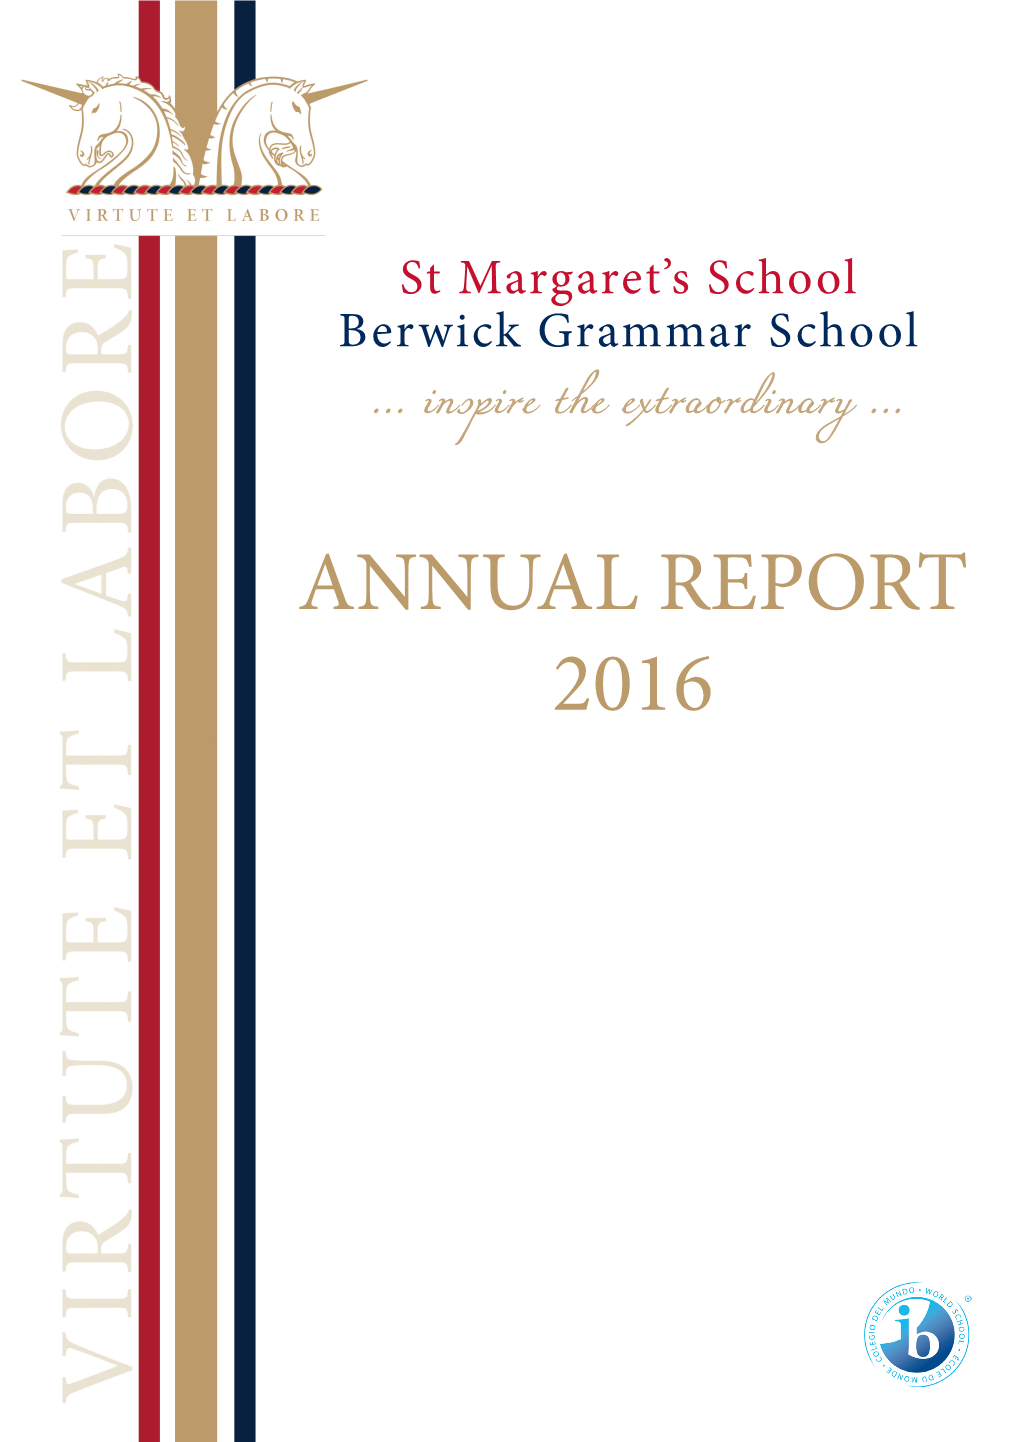 Annual Report 2016 Contents